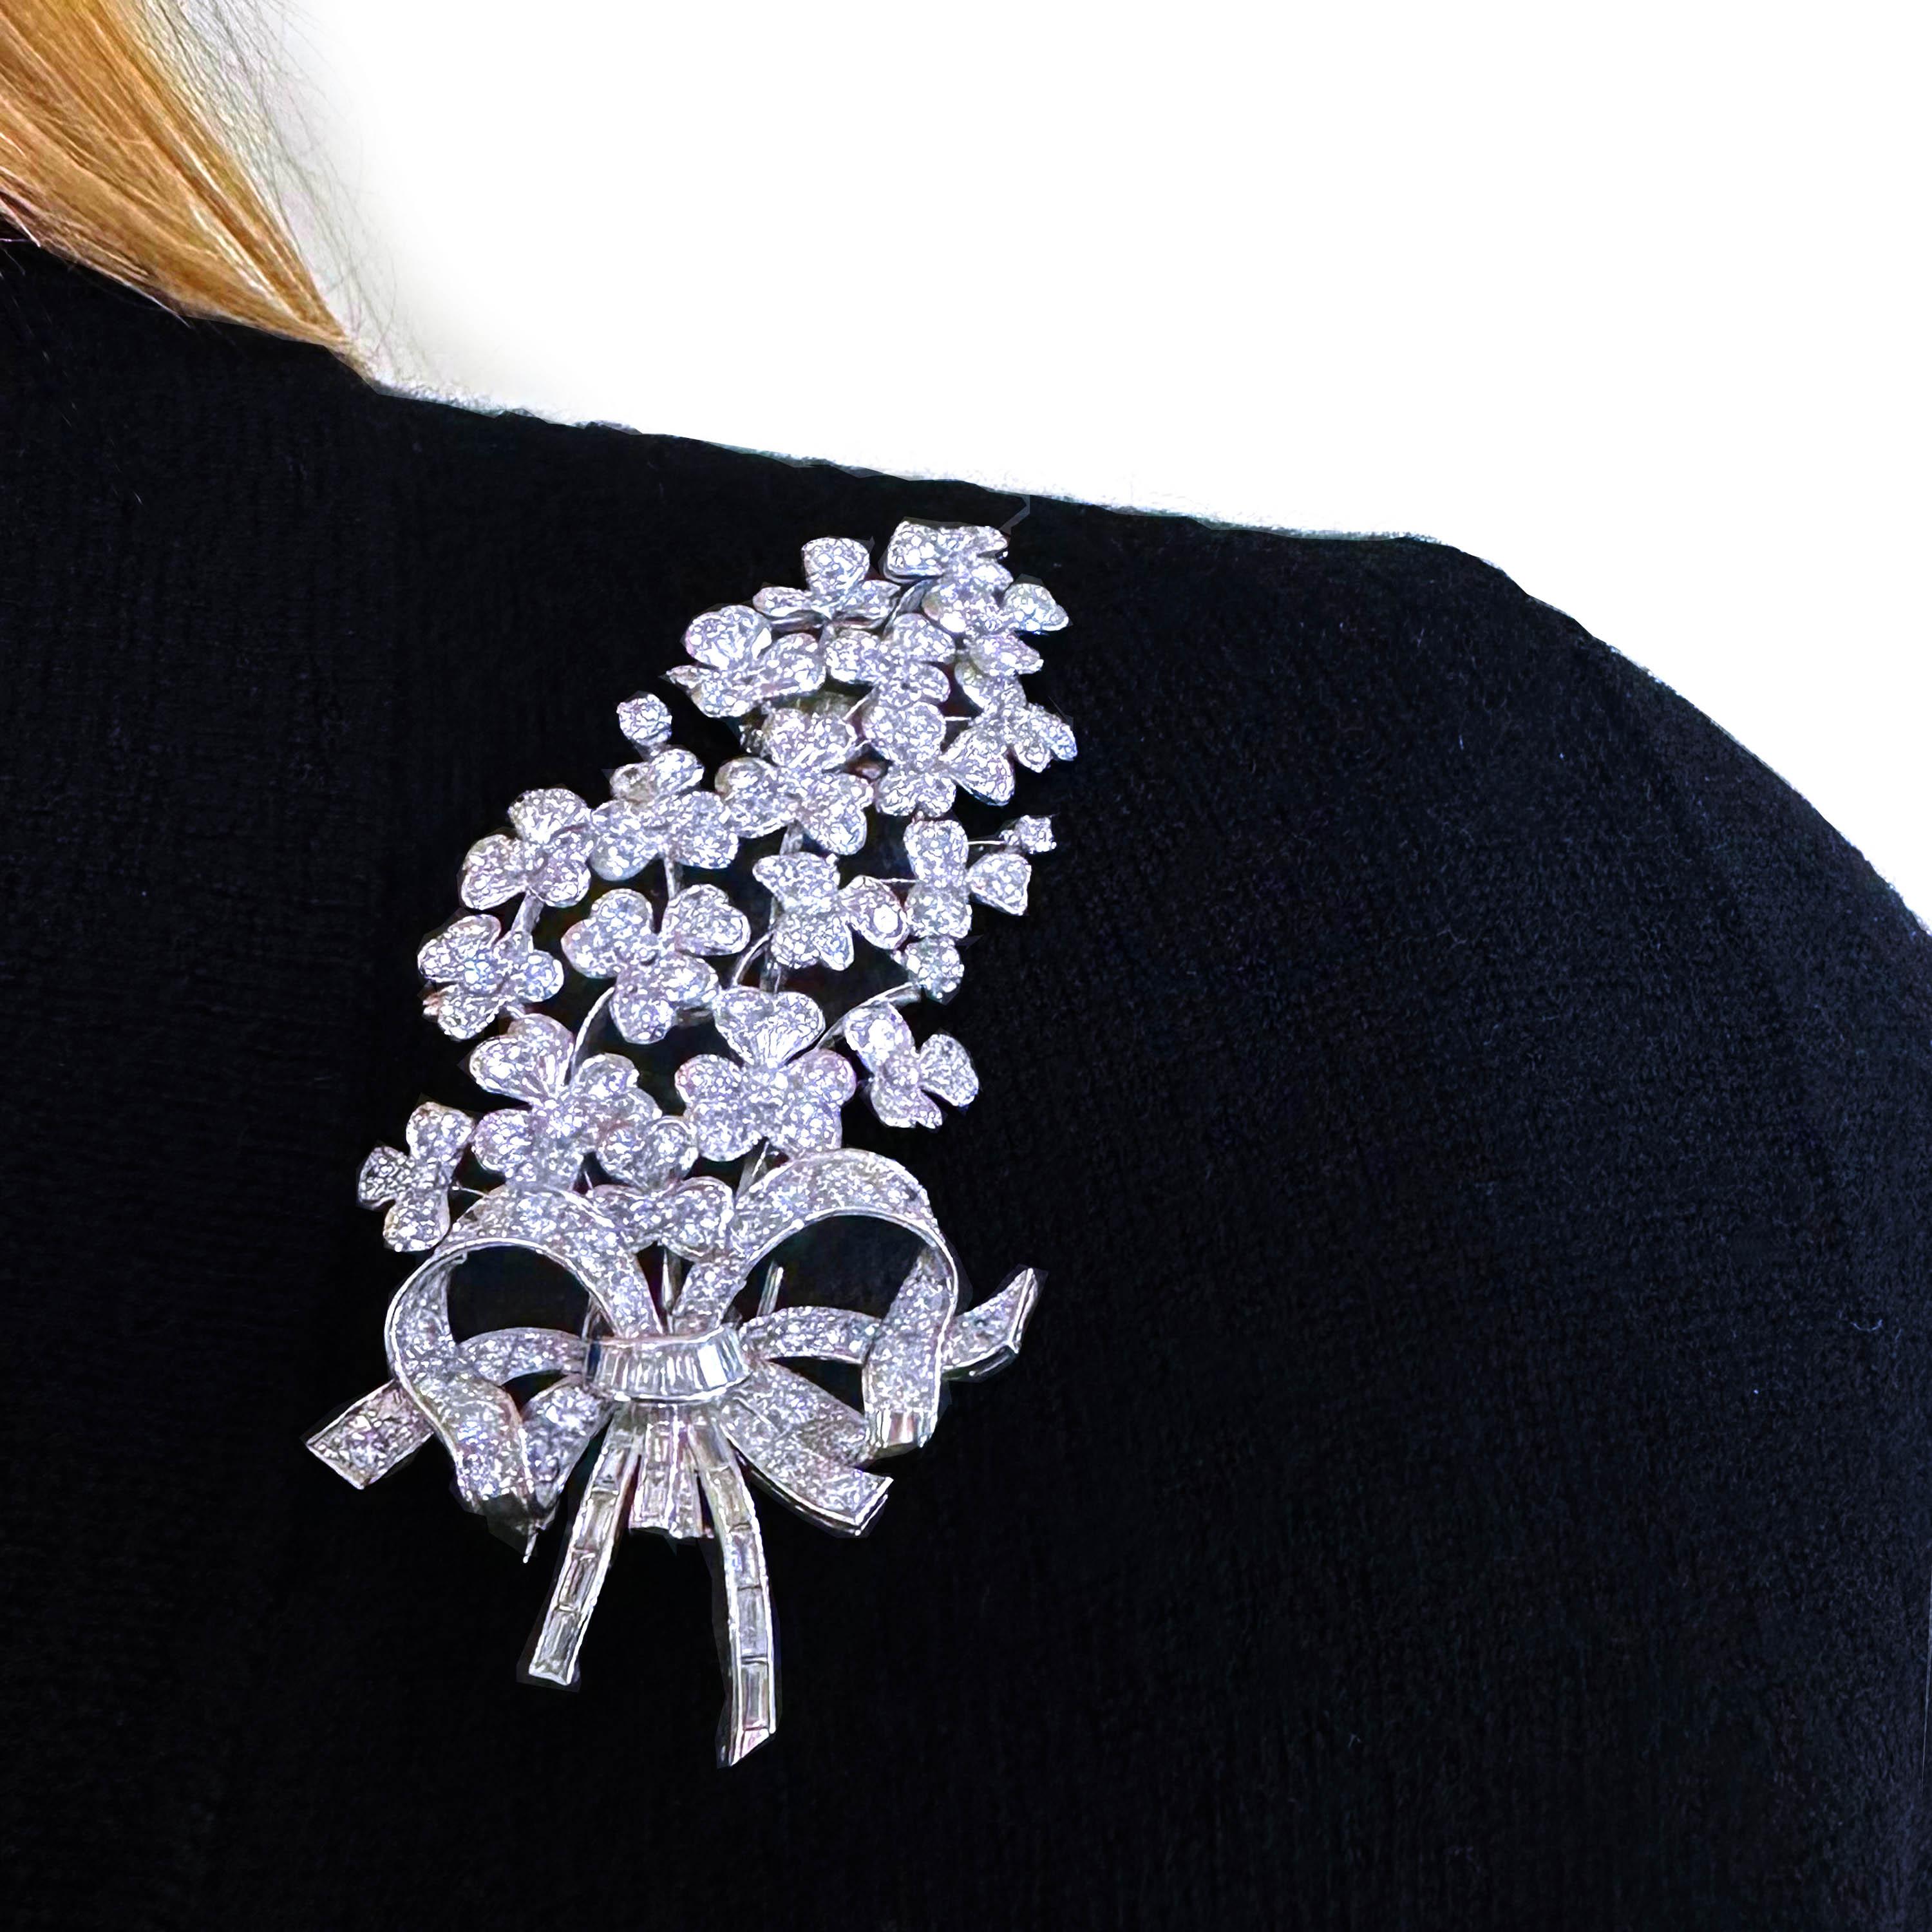 A vintage diamond flower brooch, in the form of a bunch of lilac, tied with a bow, set with round brilliant-cut diamonds in the blossoms and upper bow and baguette-cut diamonds in the lower bow and stems, mounted in white gold. Marked Made in